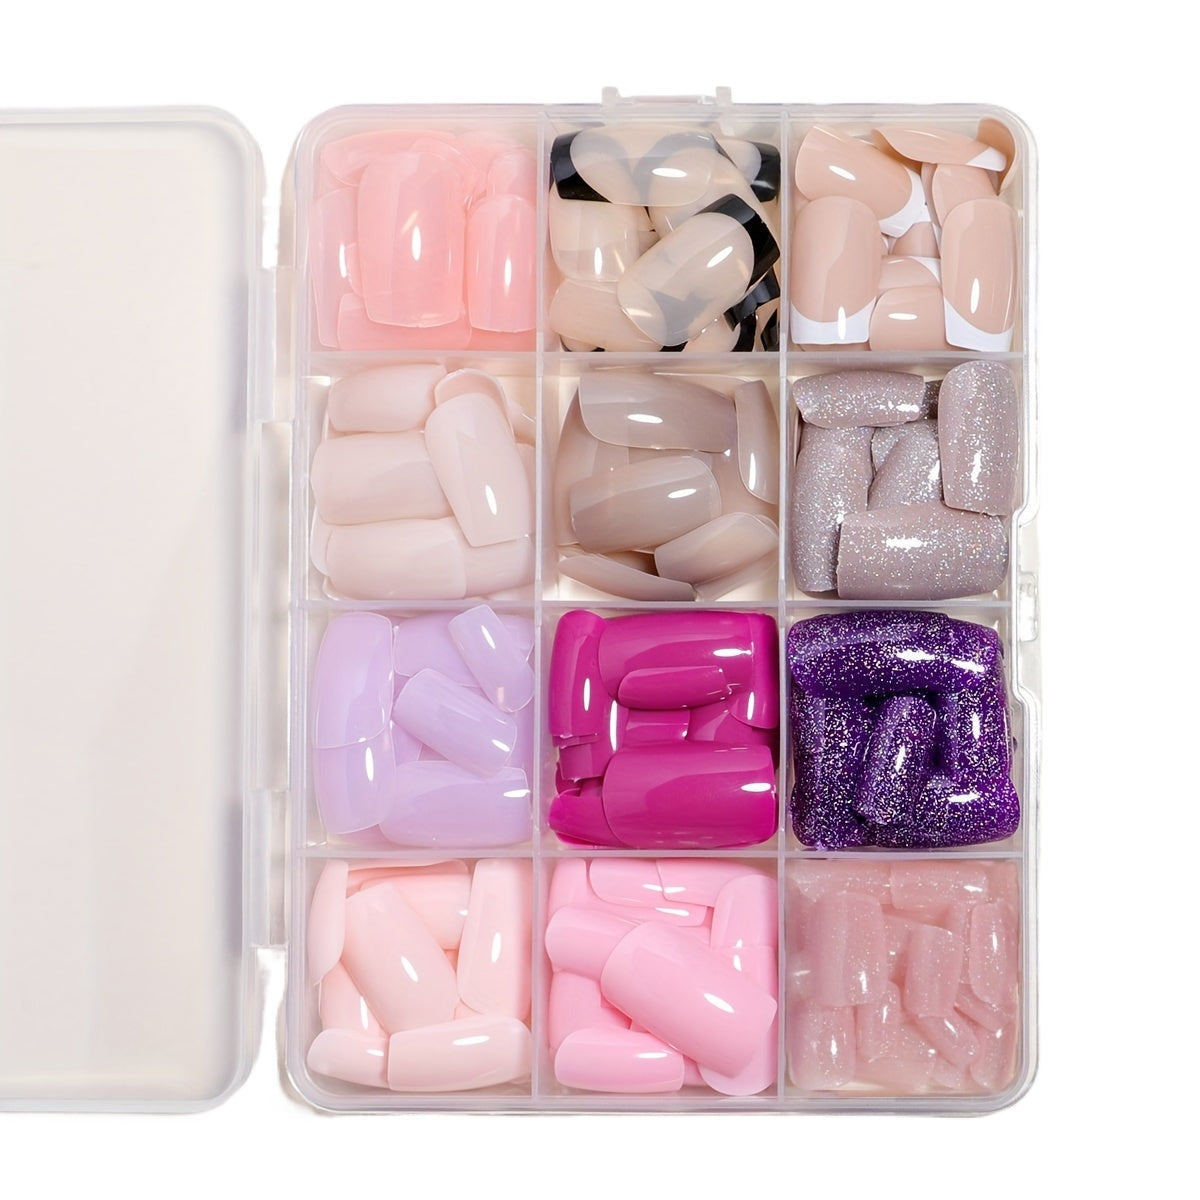 12-Pack Glossy Glitter Press-On Nails – 288 pcs Full Cover Square Acrylic Fake Nails in 12 Colors